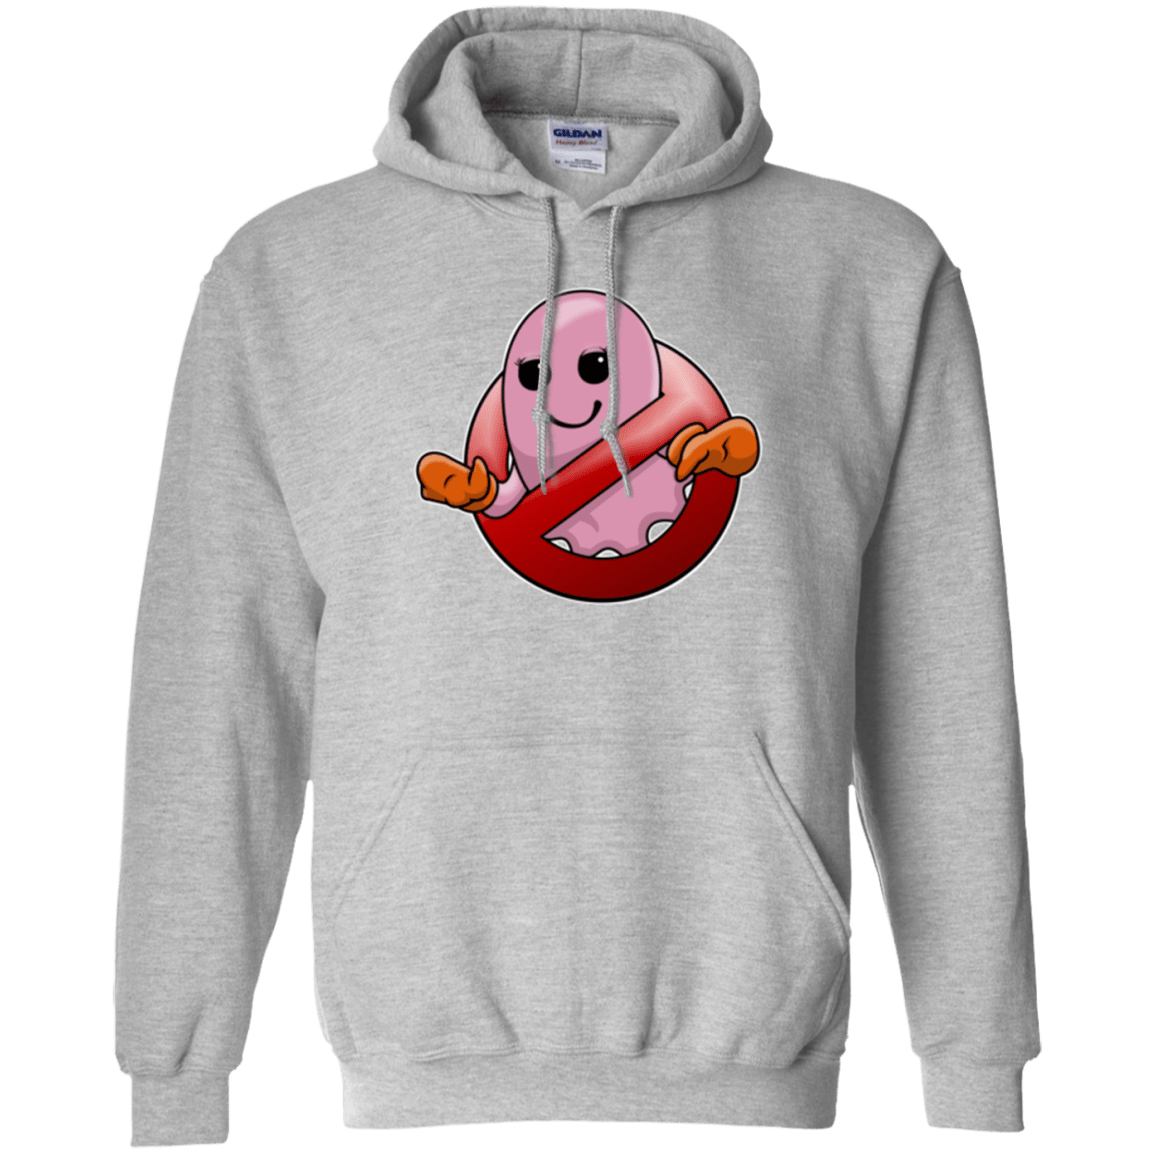 Sweatshirts Sport Grey / Small Pinky Buster Pullover Hoodie